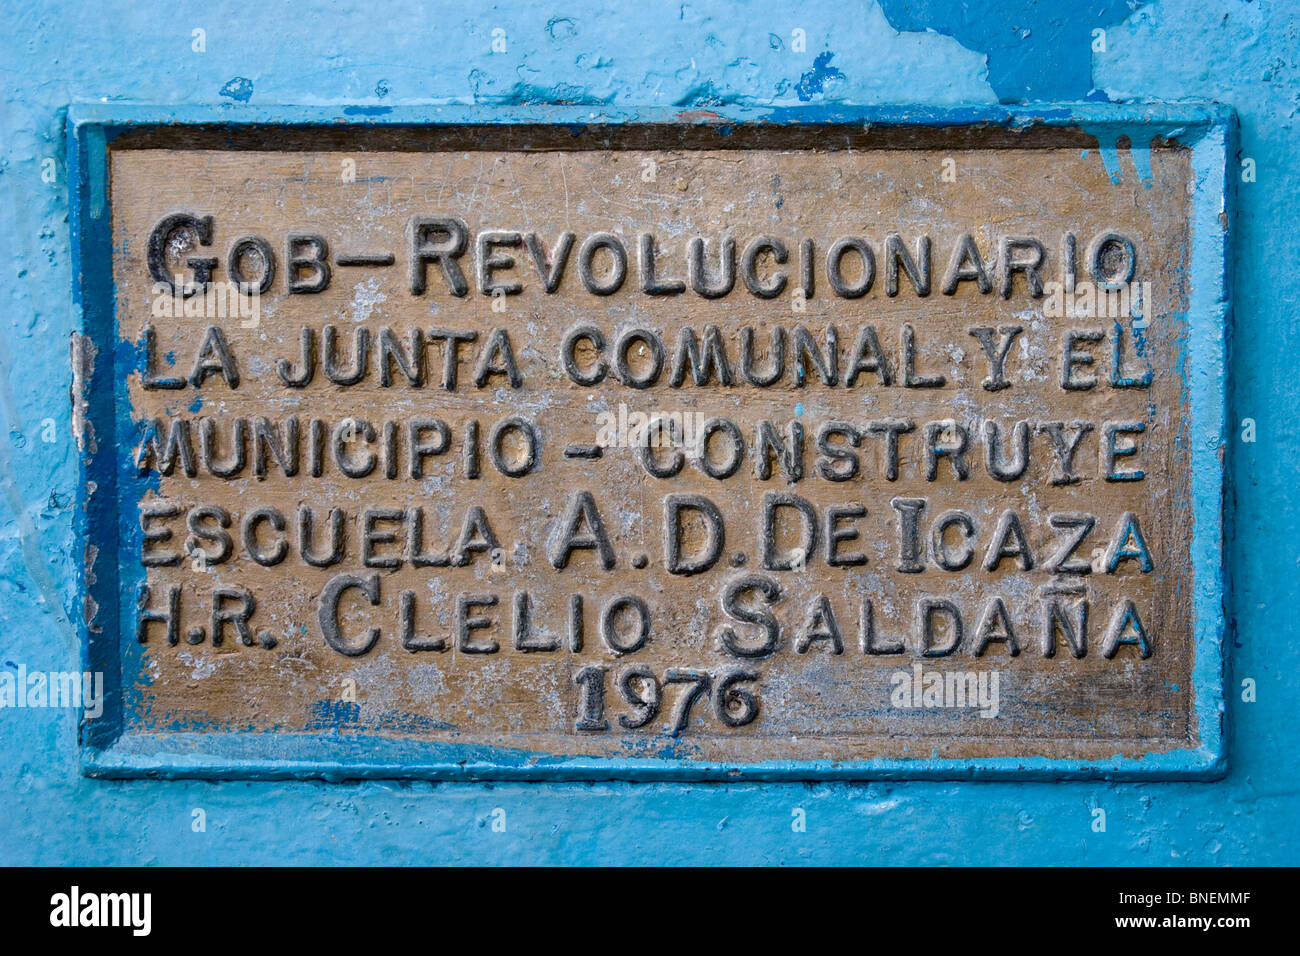 Plaque from the dictatorship days at a Government school. San Miguelito, Panama City, Republic of Panama, Central America Stock Photo